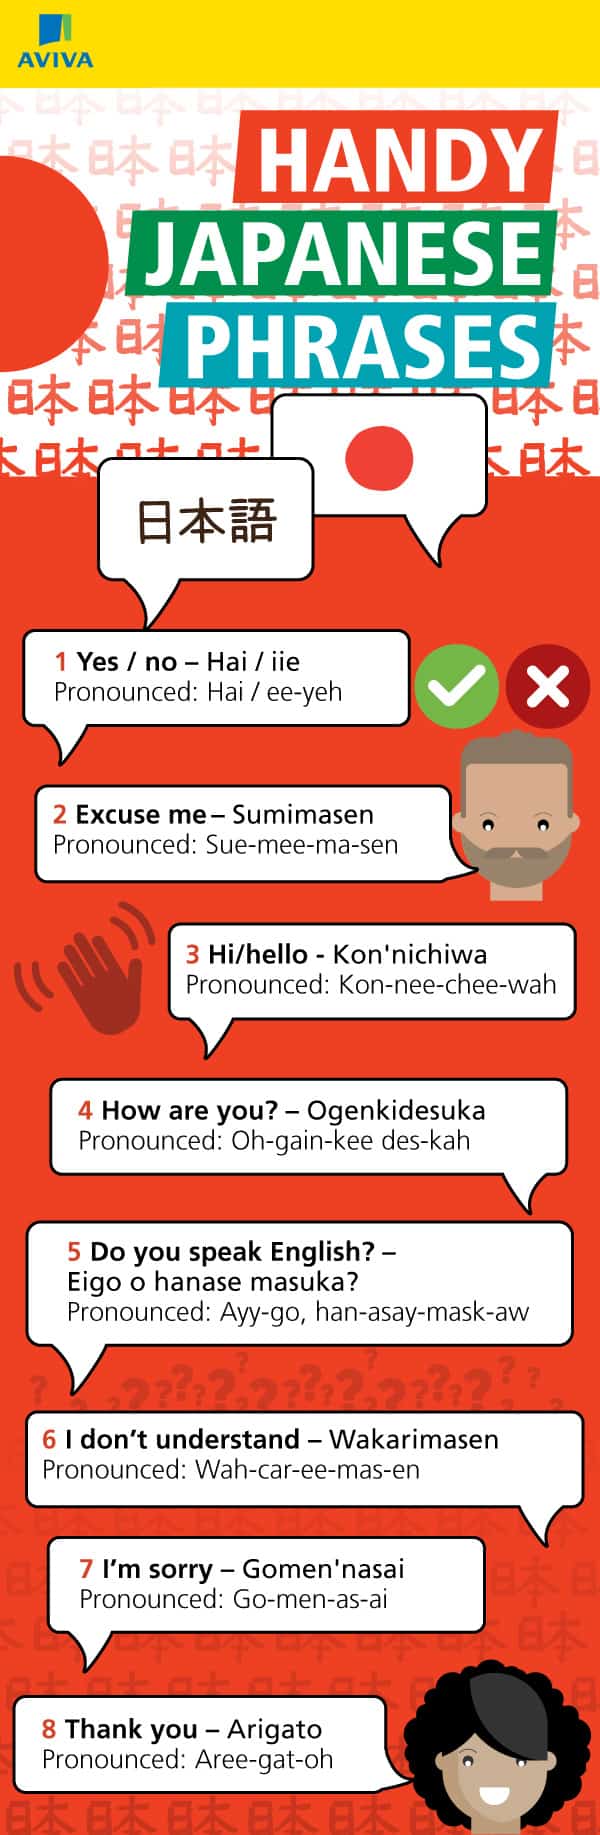 Japanese phrases infographic, handy translations English to Japanese 1 to 8